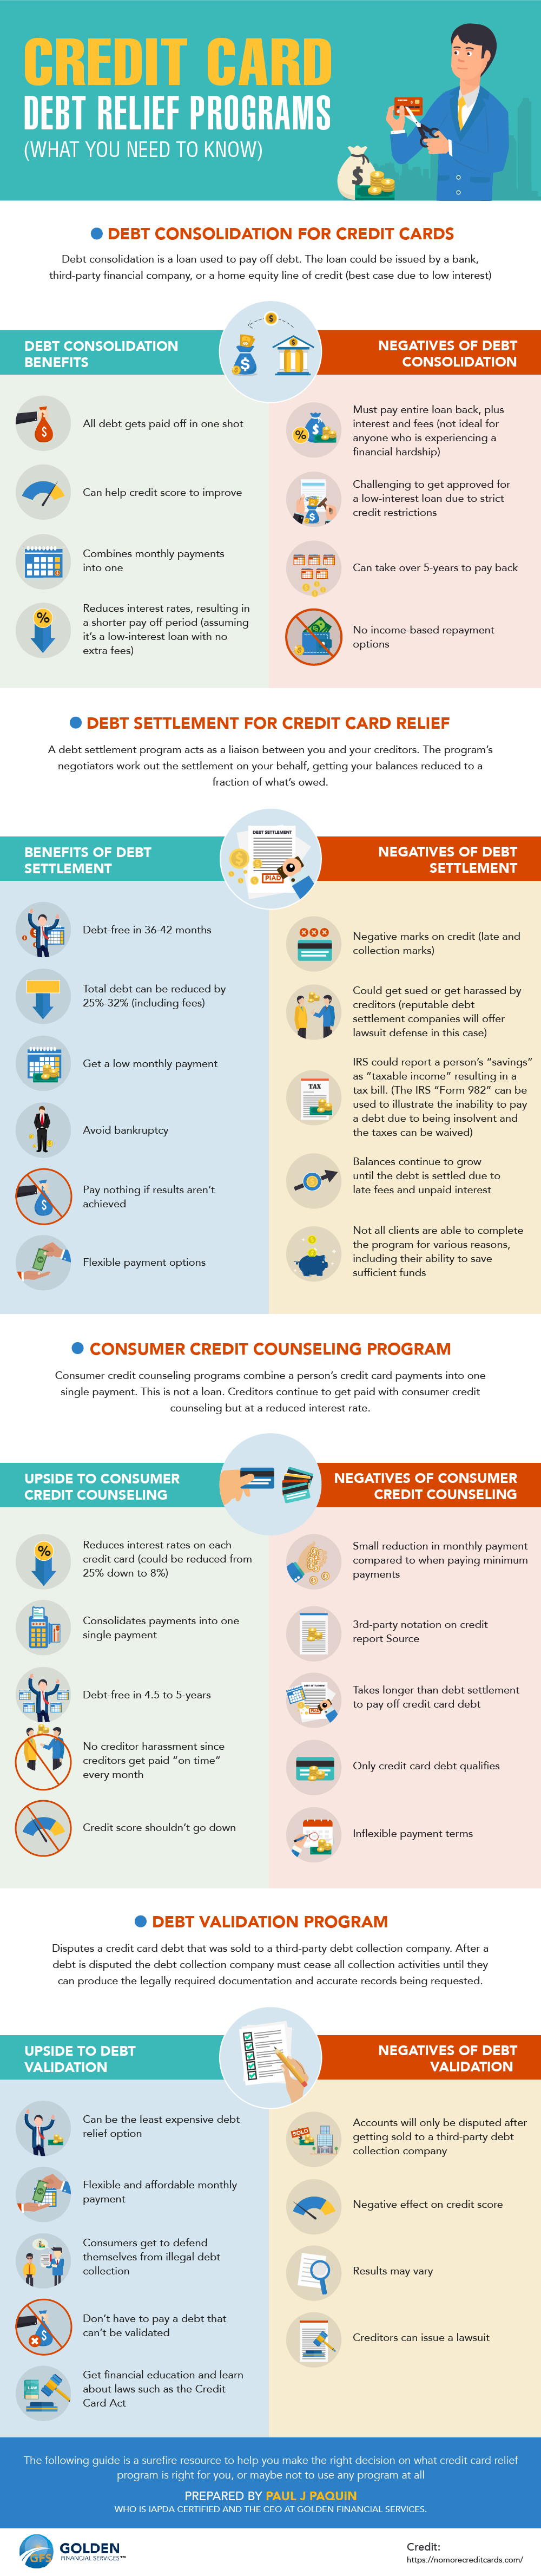 credit card debt relief infographic